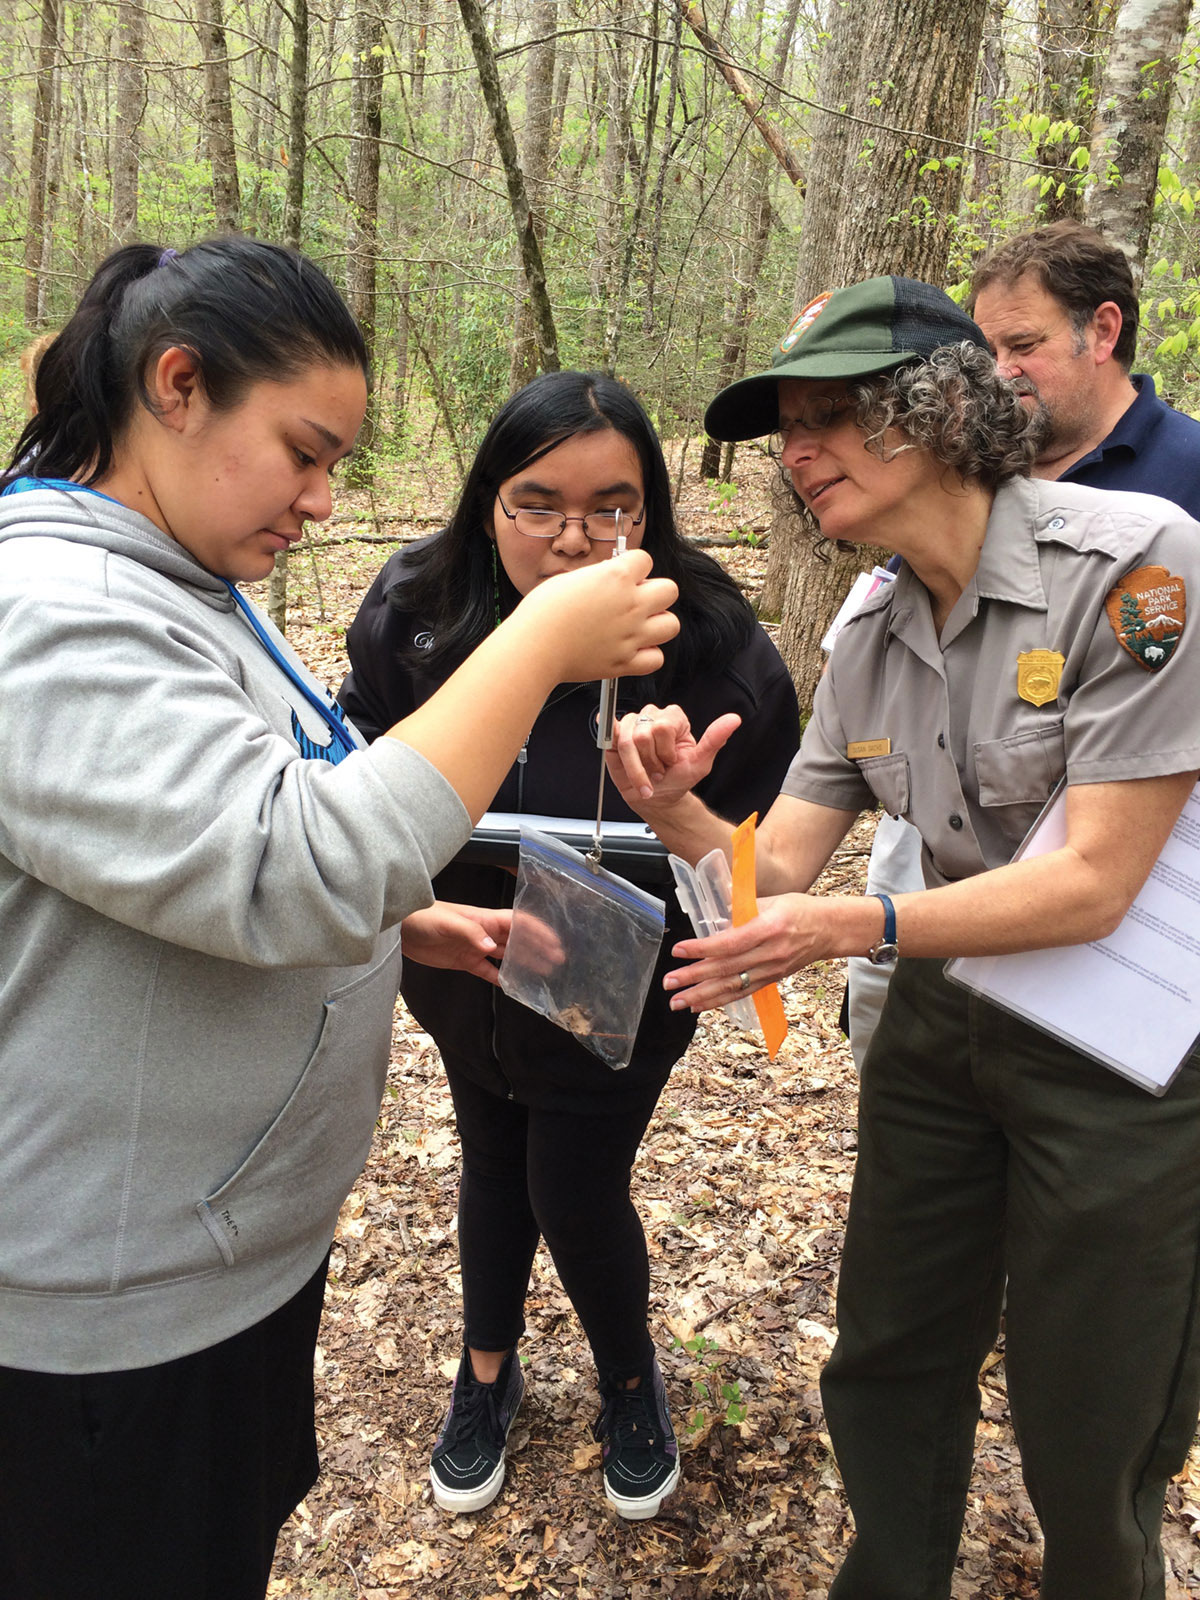 GSMNP Education Branch Coordinator Susan Sachs shows students how to weigh a salamander during a Parks as Classrooms session. Provided by Parks as Classrooms.